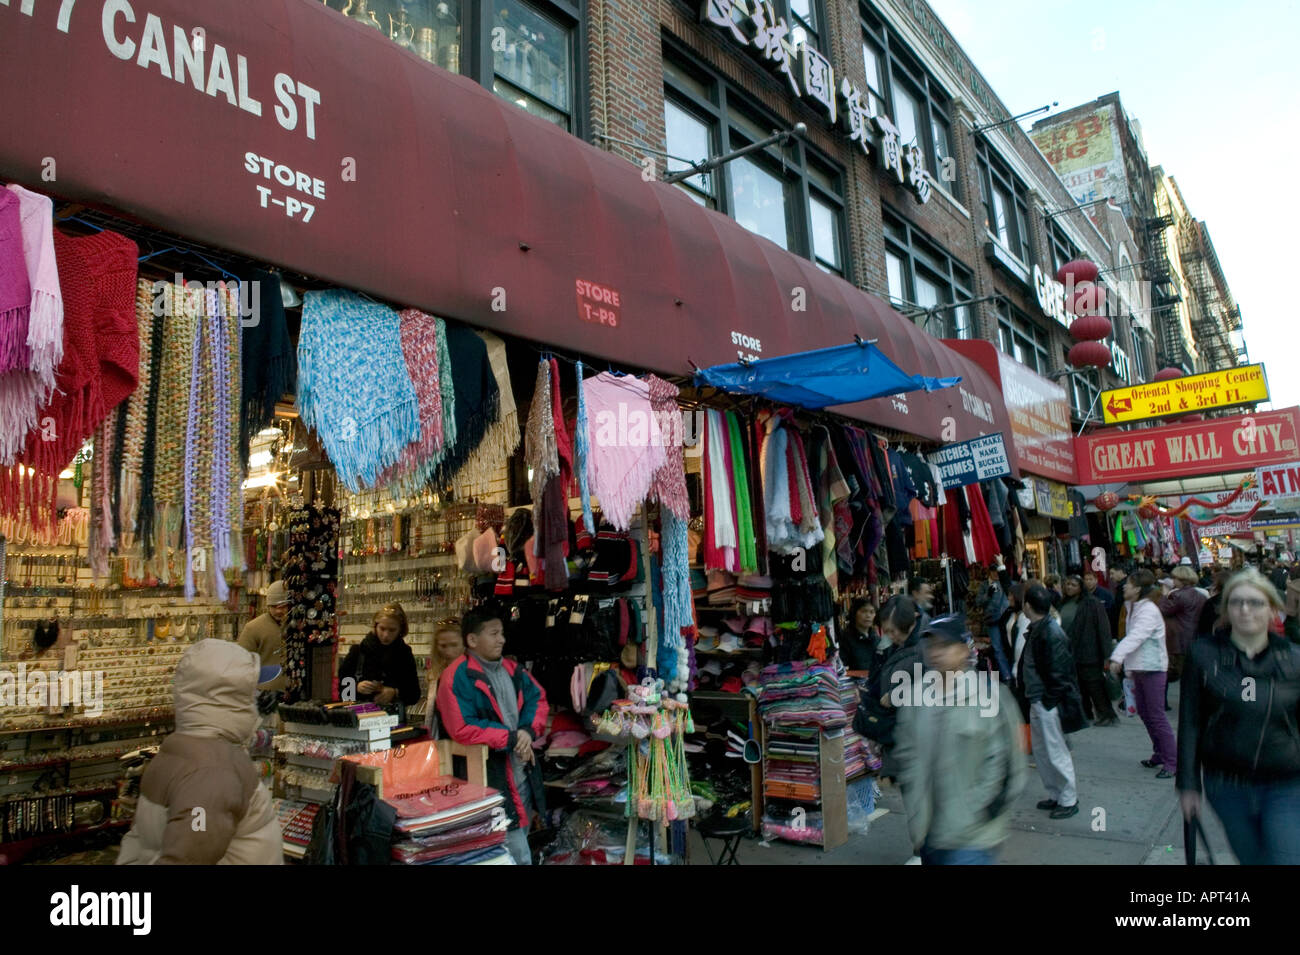 Stores on Canal street in Chinatown Manhattan New York USA